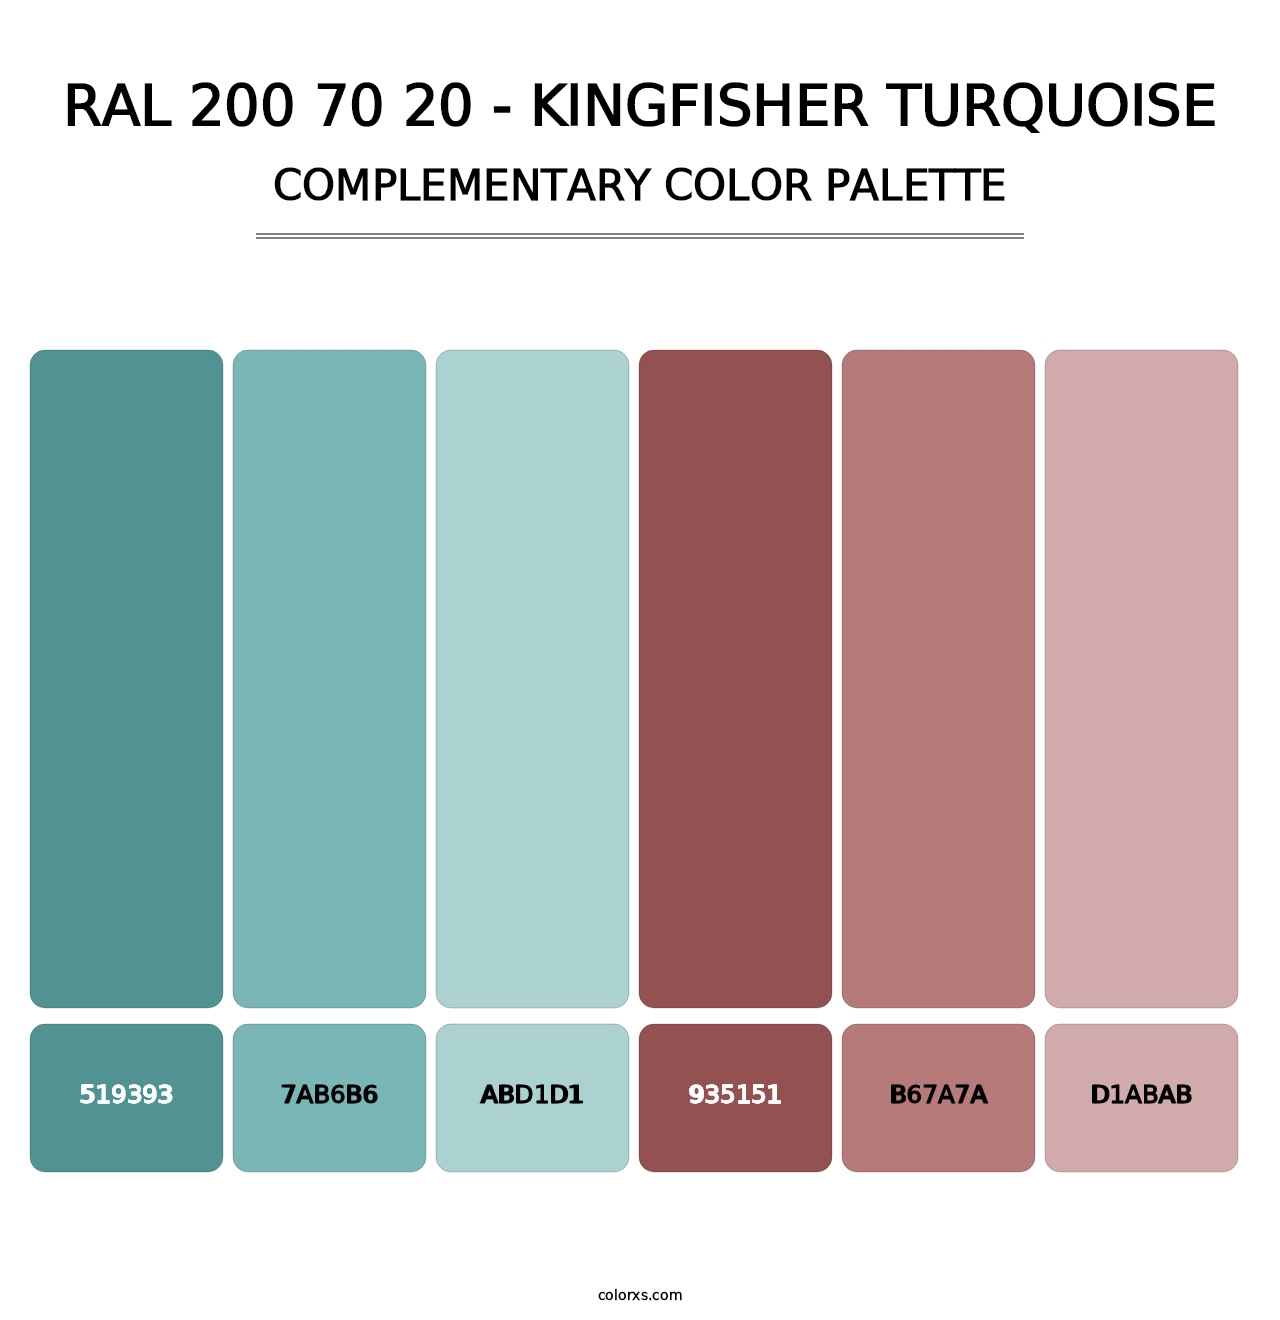 RAL 200 70 20 - Kingfisher Turquoise - Complementary Color Palette